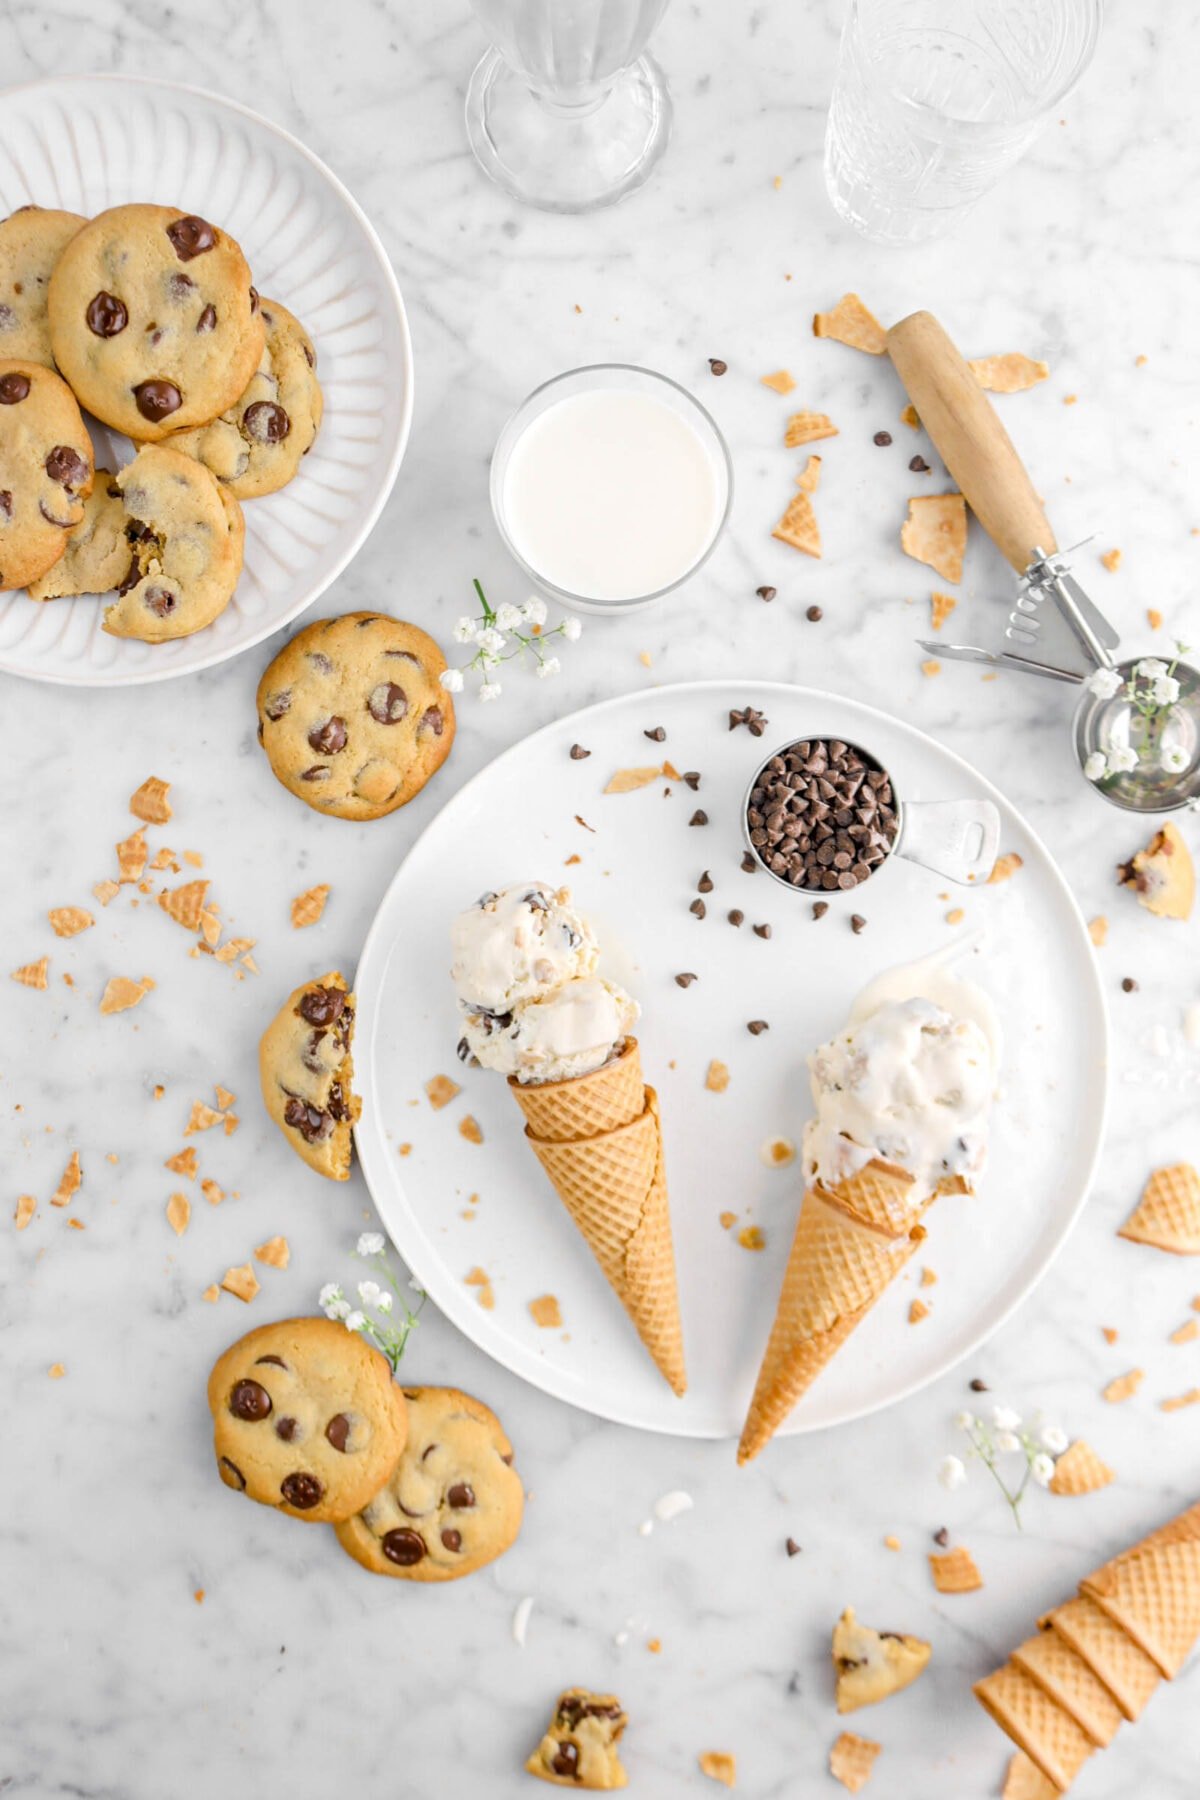 two cones of chocolate chip cookie dough ice cream on white plate with cookies, measuring cup, white flowers, mini chocolate chips, ice cream cone pieces, and ice cream scoop beside